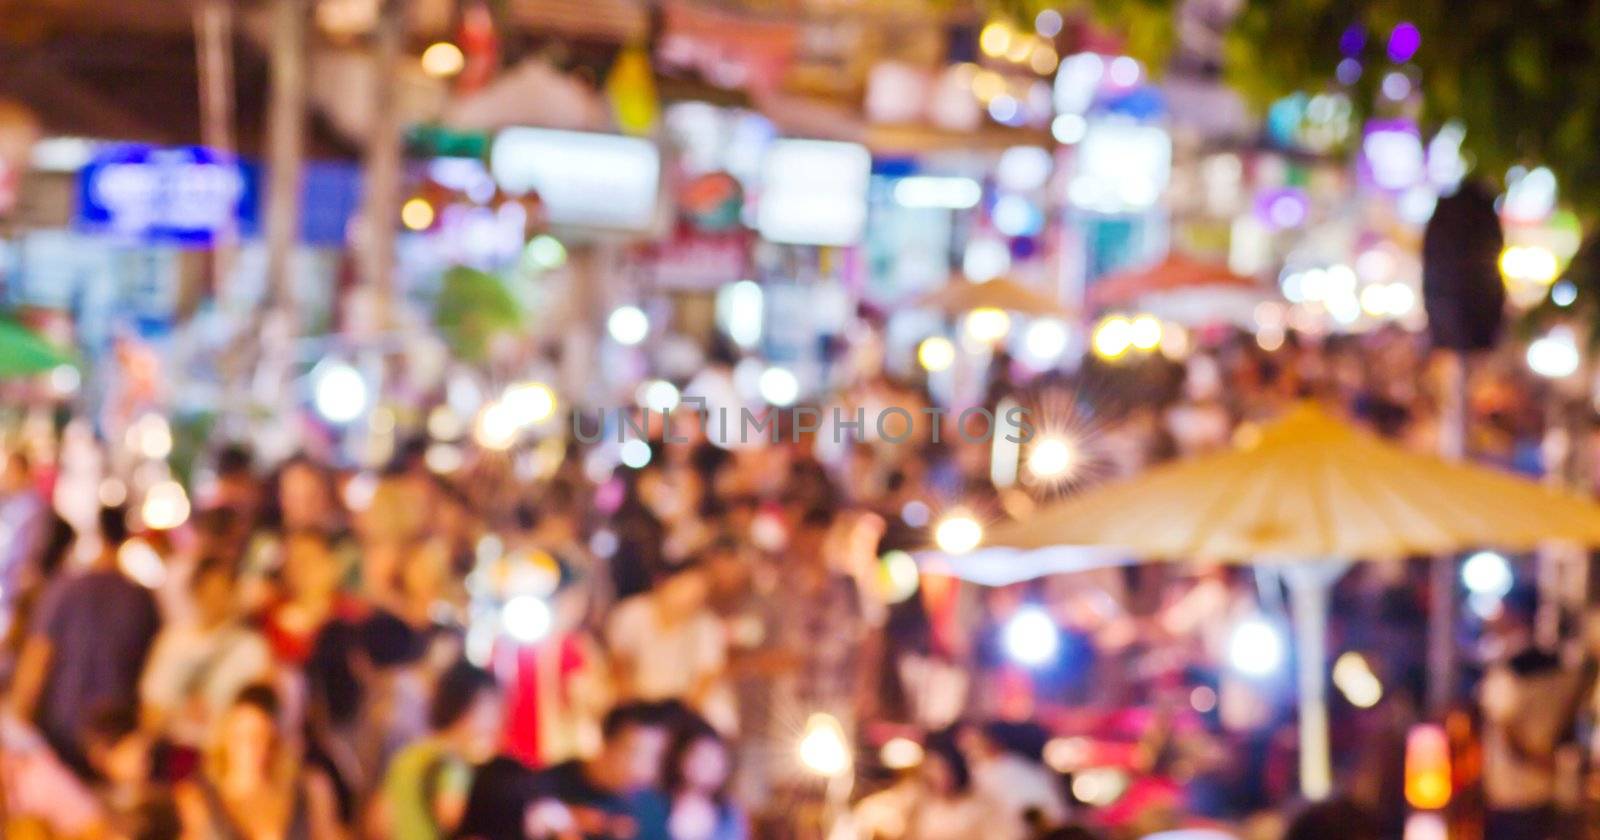 Chiang Mai Walking Street. Out of focus. by Myimagine